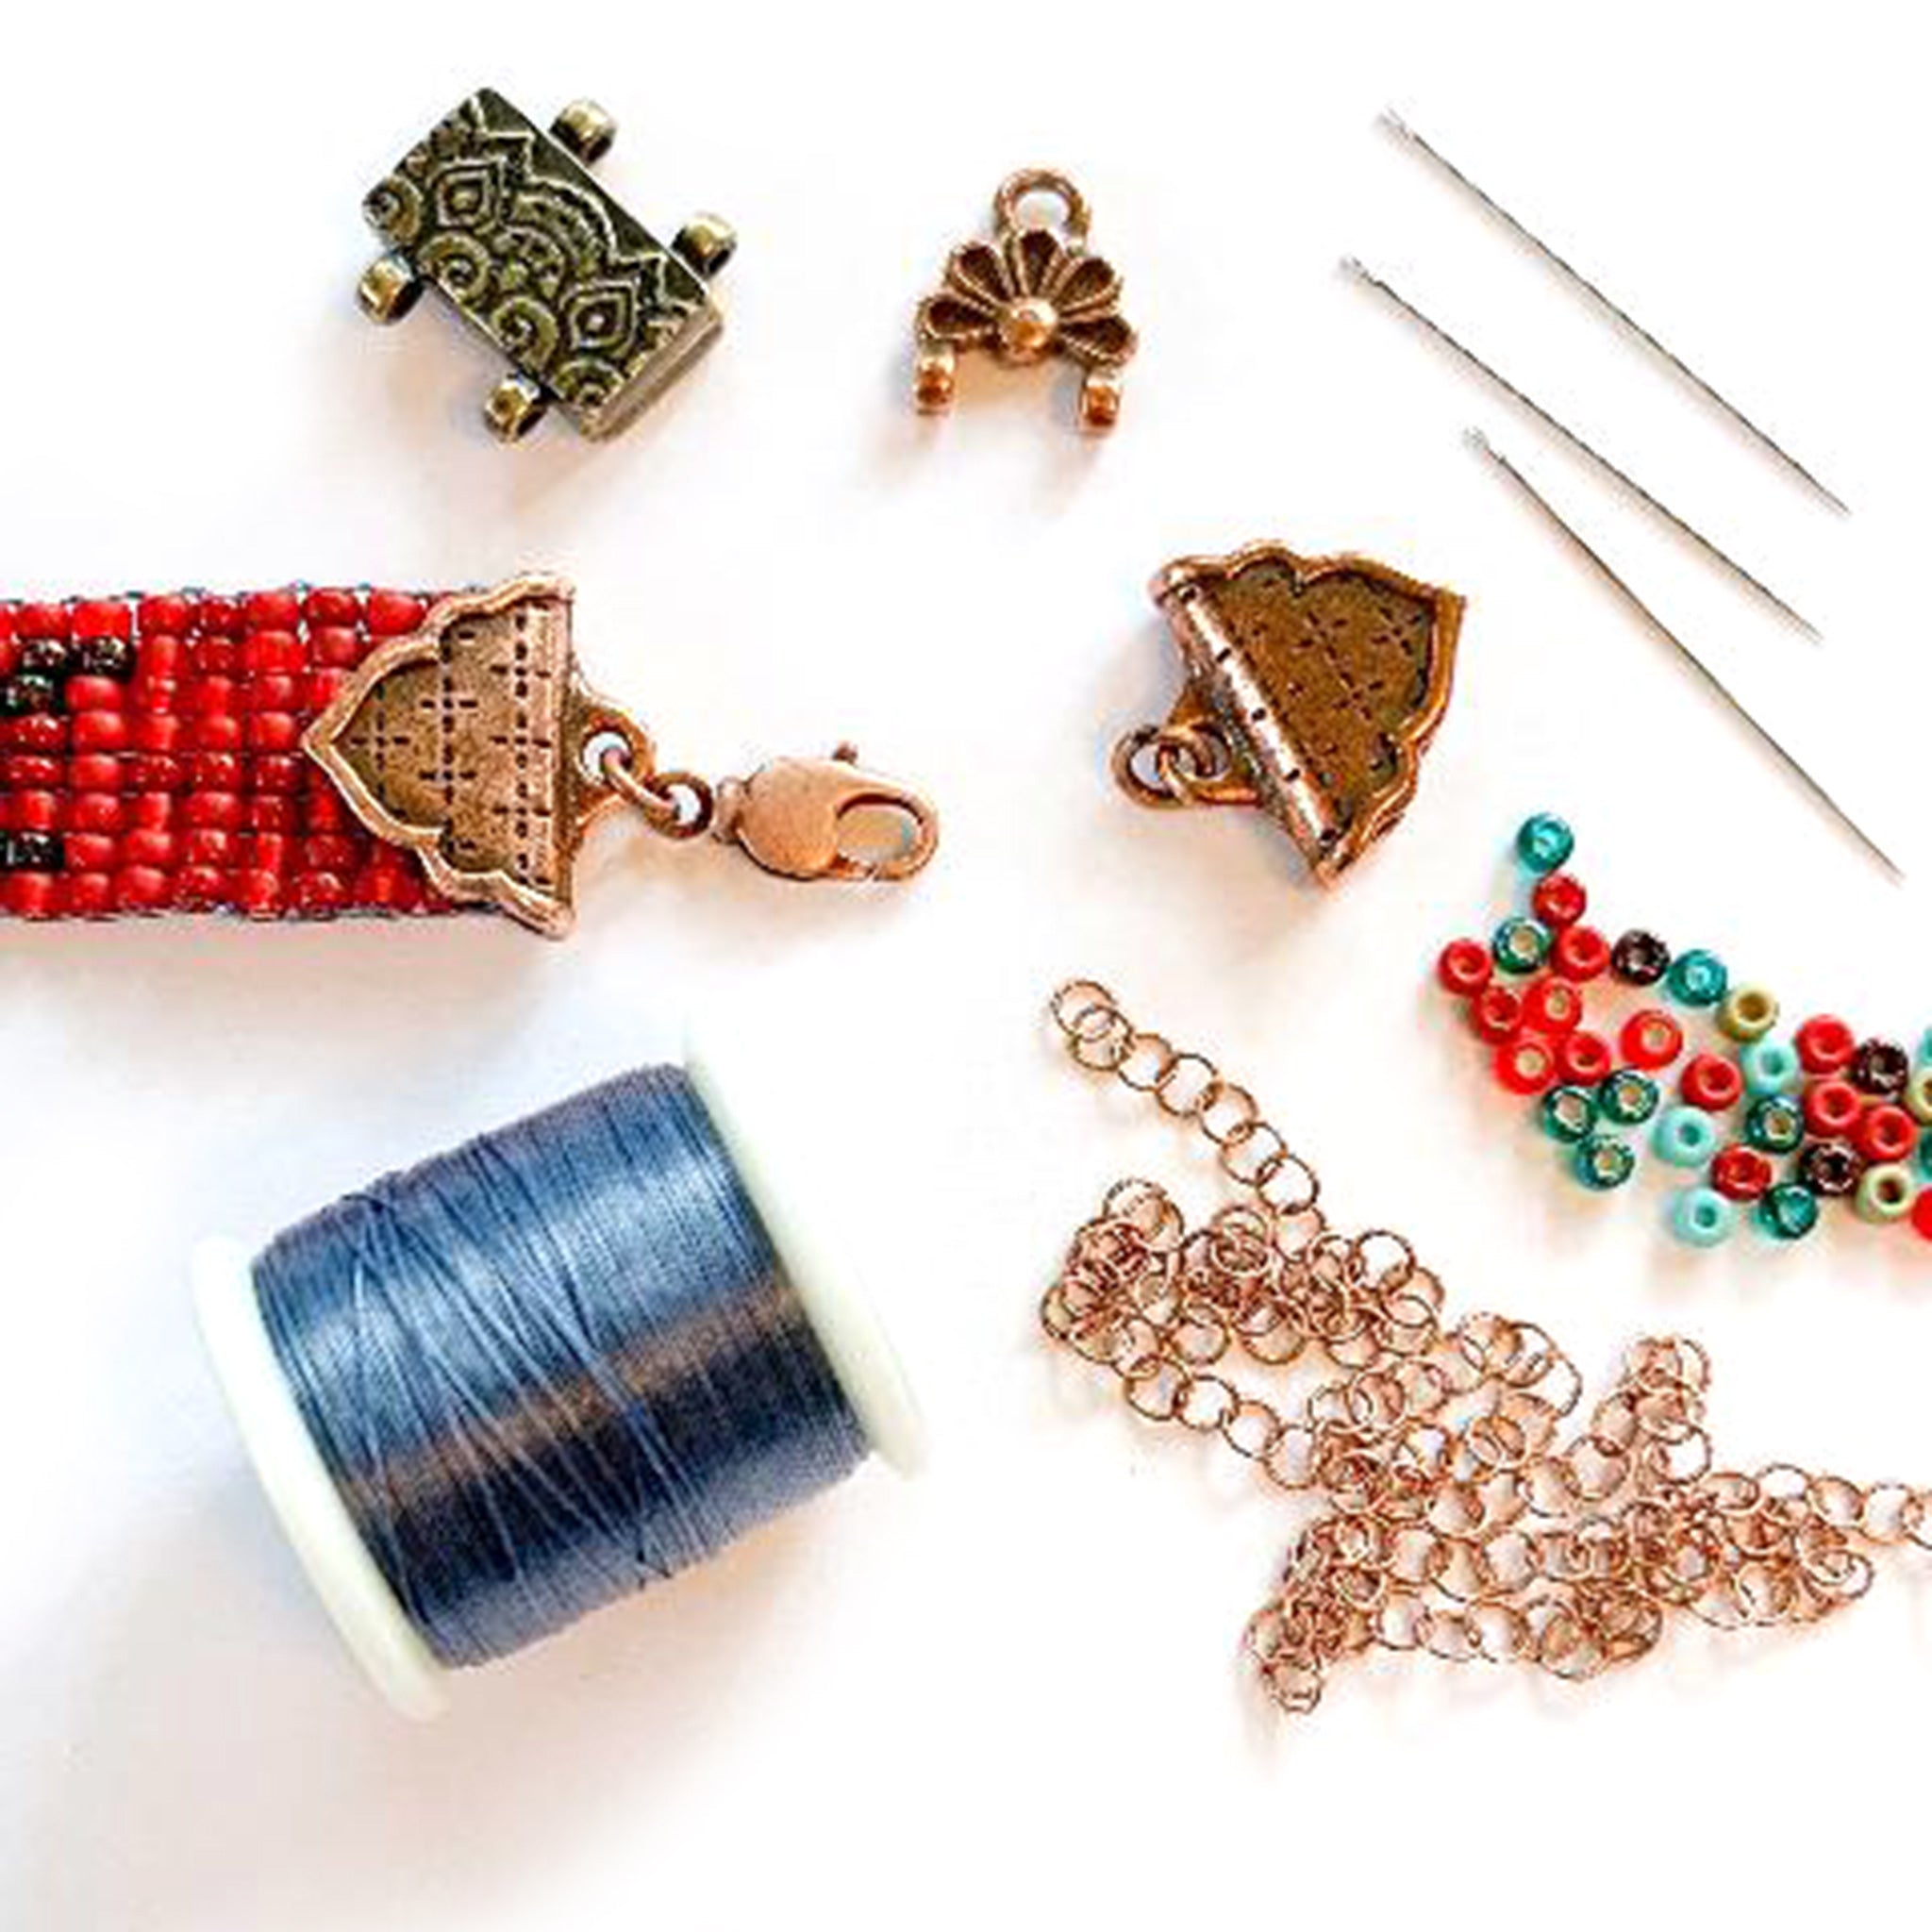 Closures for Seed Bead Projects<br> 10.7.20